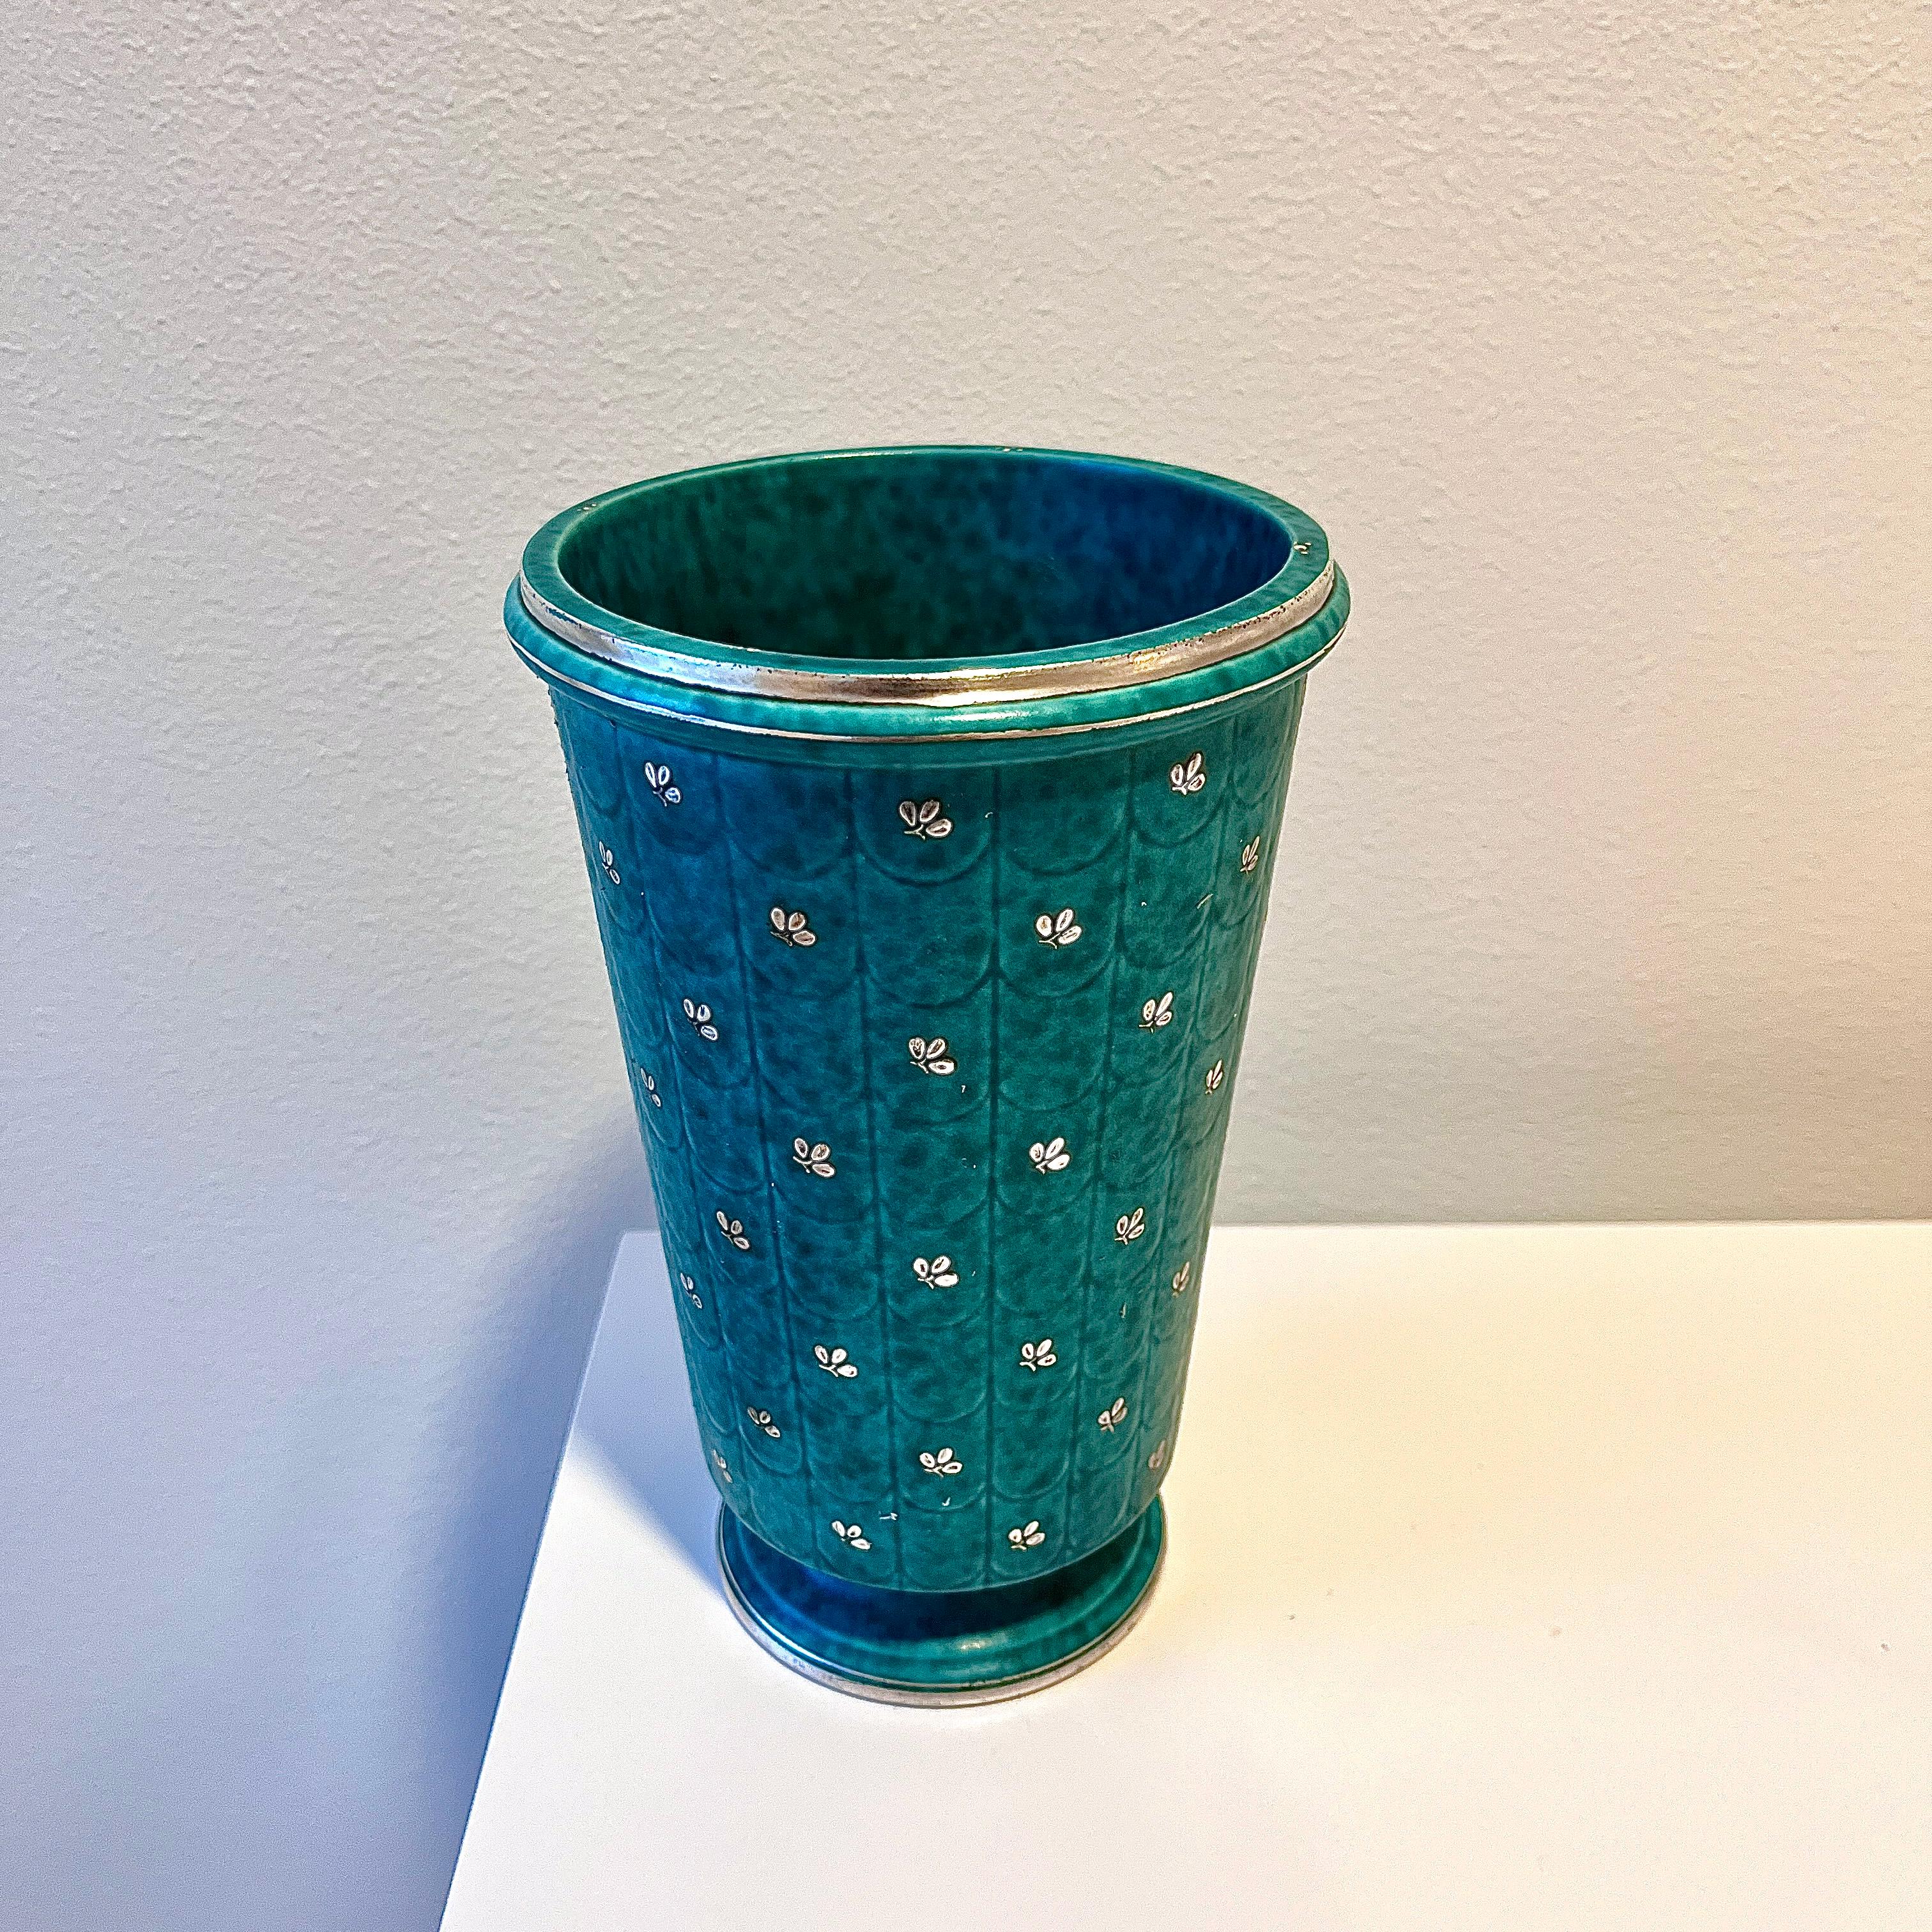 Stoneware vase designed by Wilhelm Kåge from the ‘Argenta’ series for Gustavsberg, Sweden, 1931. Signature green glaze with decor of flowers and stripes at the rim and base in silver.

Signed in silver at the base.

In great condition, smaller signs